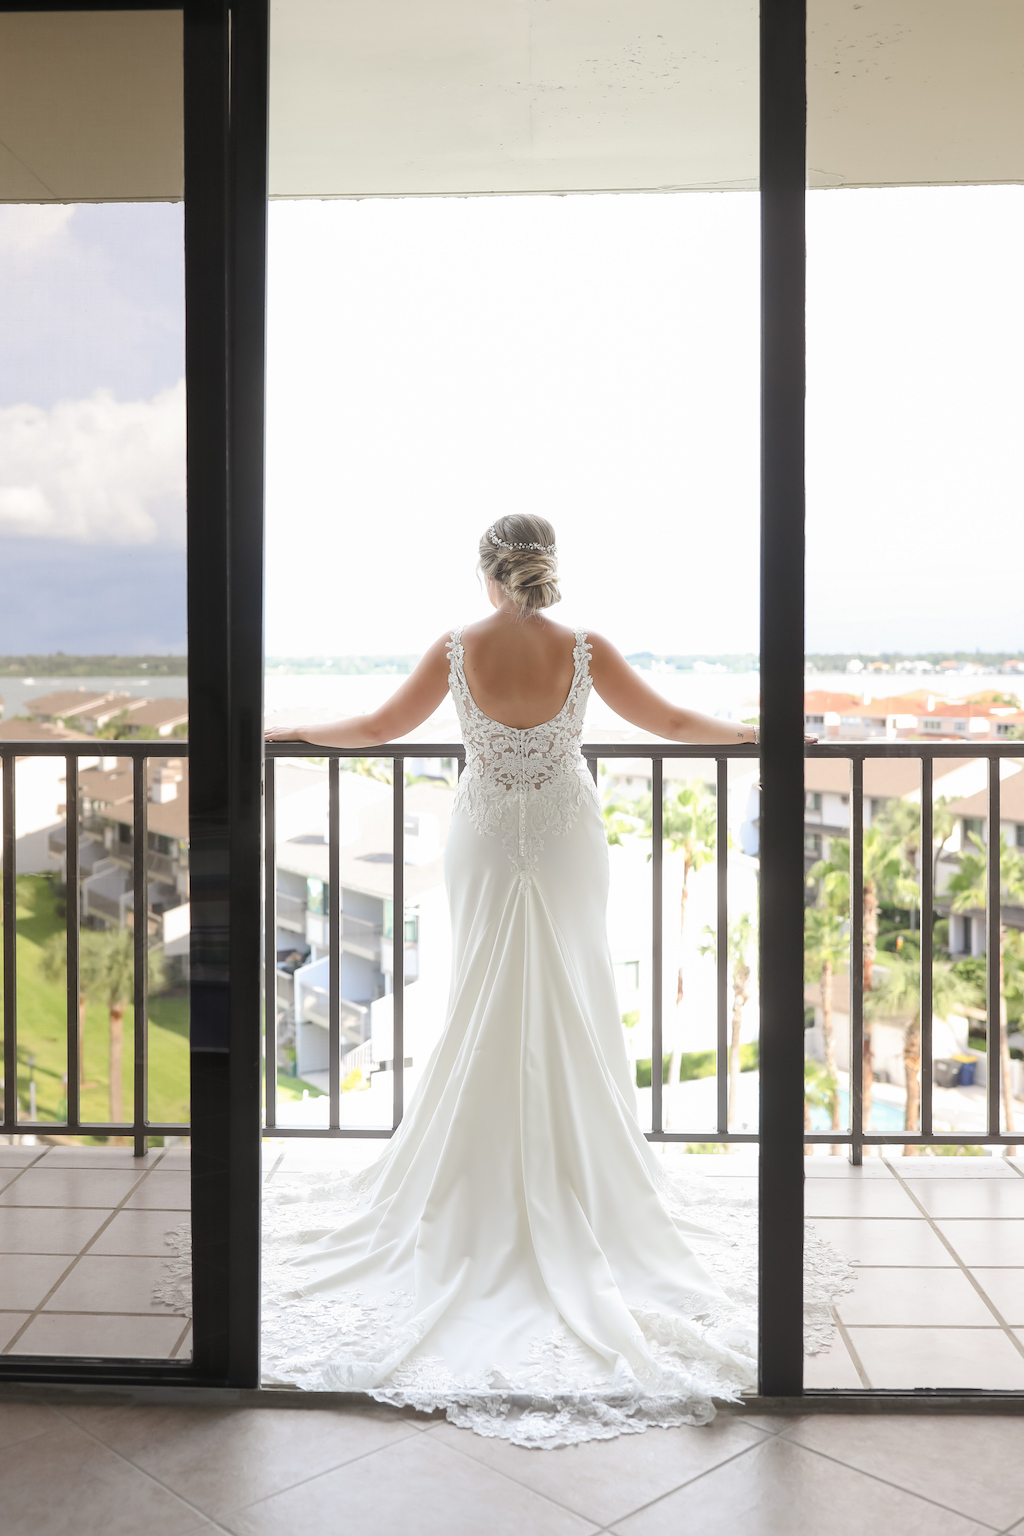 Florida Bride on Balcony of Hotel in Scoop Back Lace Fitted Wedding Dress | Tampa Bay Wedding Photographer Lifelong Photography Studios | Clearwater Beach Hotel Wedding Venue Hilton Clearwater Beach